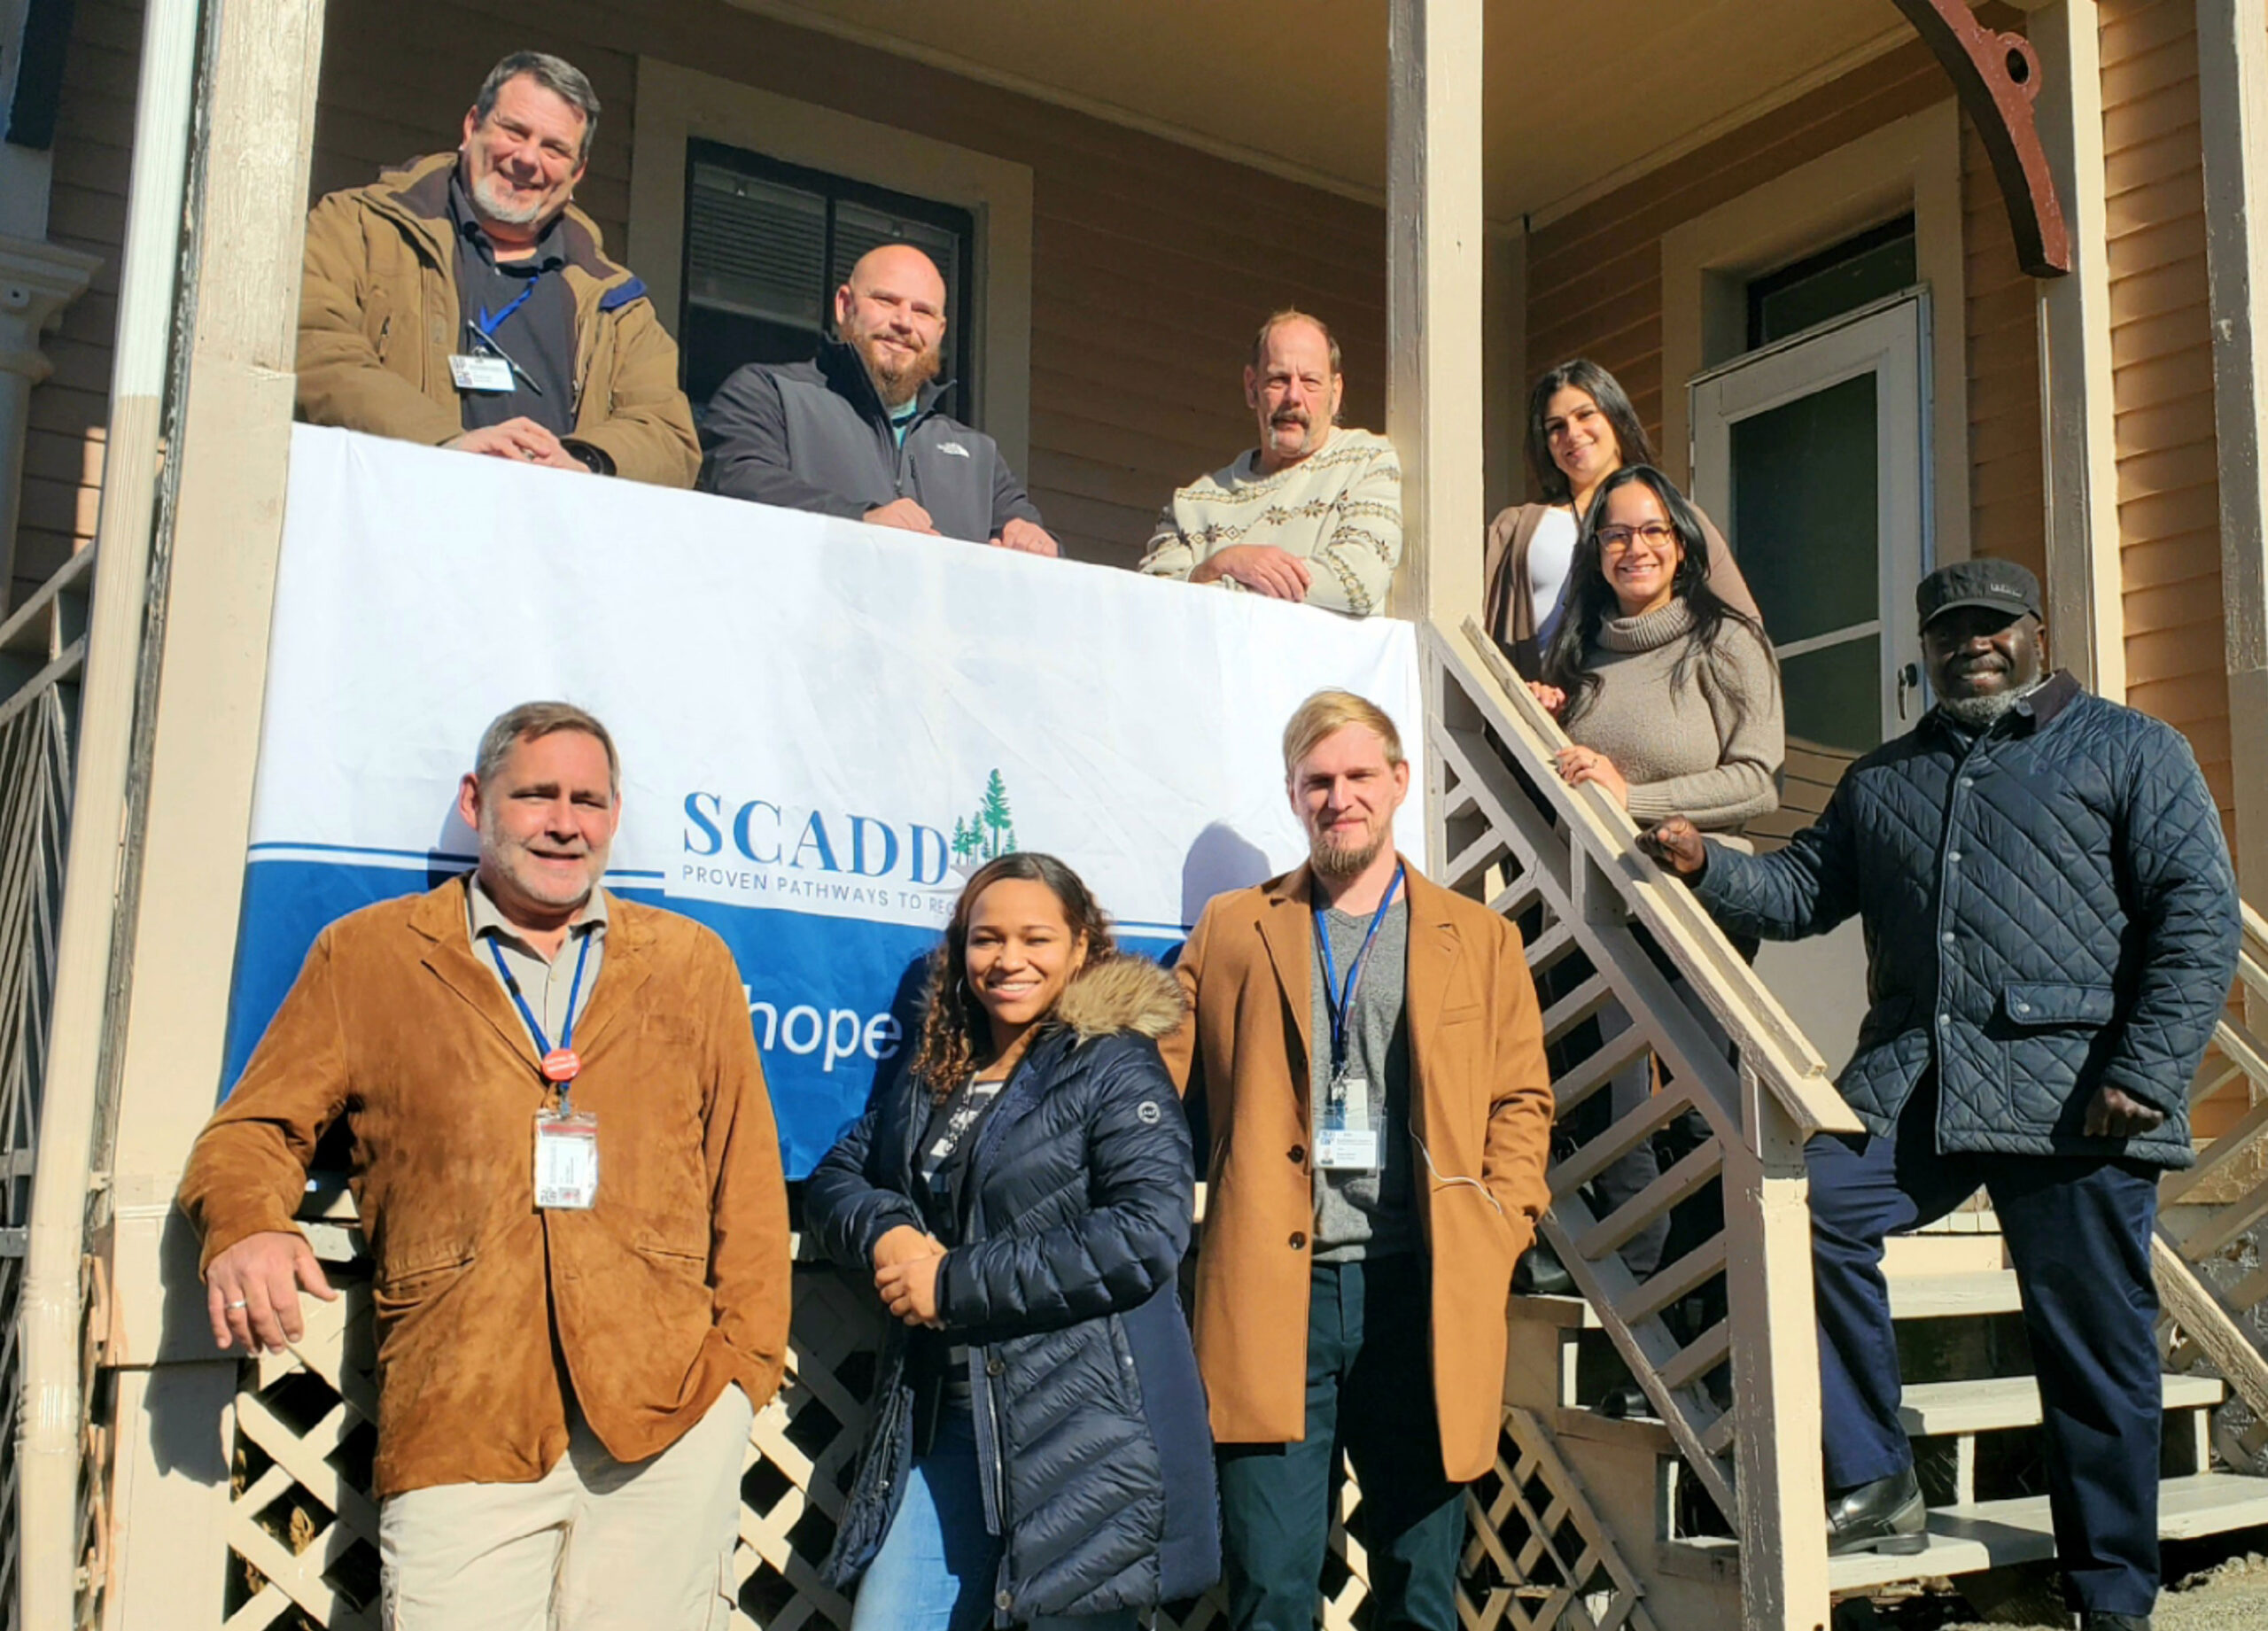 Southeastern Council on Alcoholism and Drug Dependence, Inc. support services team